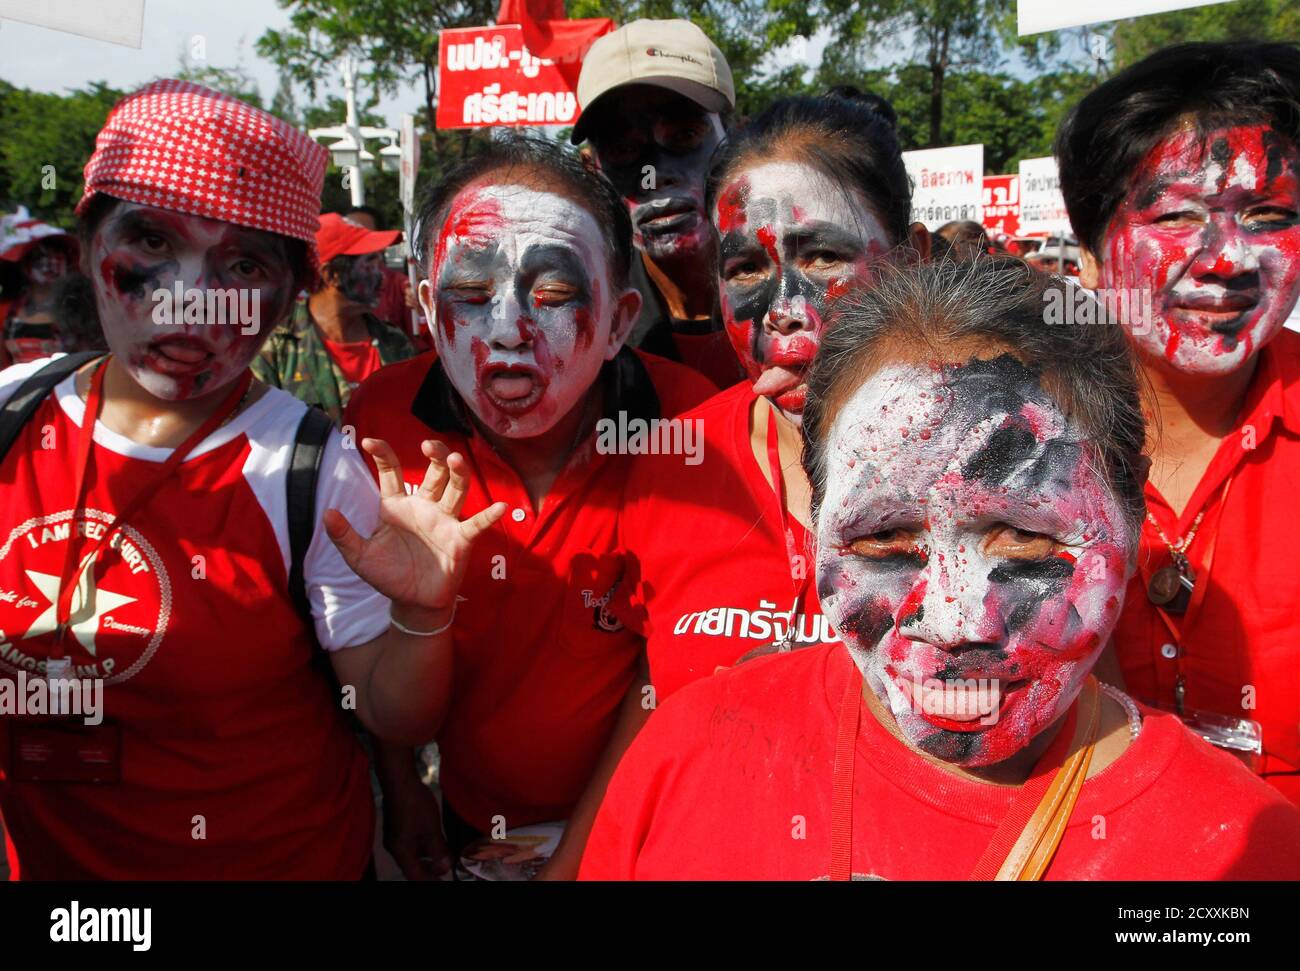 Red shirt supporters dress up as ghosts to mark the second anniversary of a government crackdown on red shirt protesters at Ratchaprasong intersection in Bangkok May 19, 2012. Red shirts gathered to mark the two year anniversary of a government crack down that left 91 people dead and over 2,000 injured. REUTERS/Sukree Sukplang (THAILAND - Tags: POLITICS CIVIL UNREST RELIGION) Stock Photo